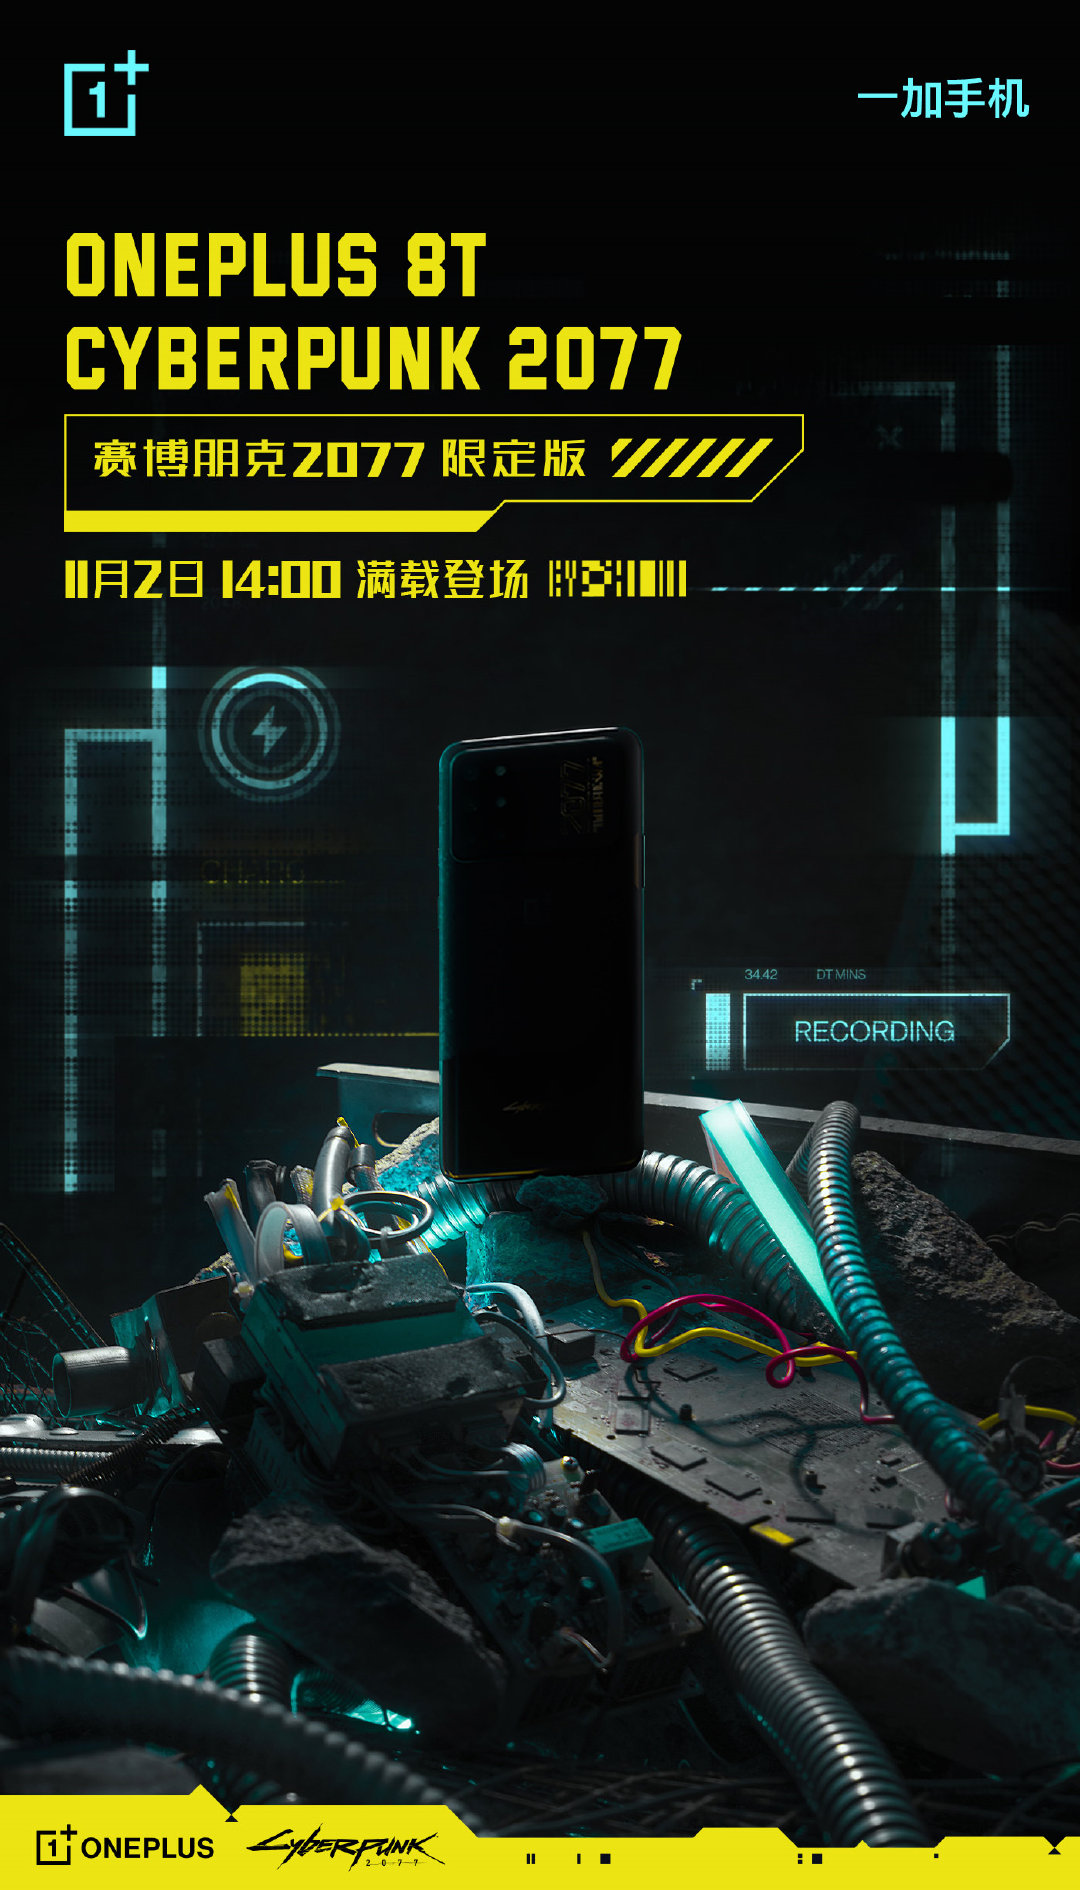 OnePlus 8T Cyberpunk 2077 Limited Edition Coming On November 2